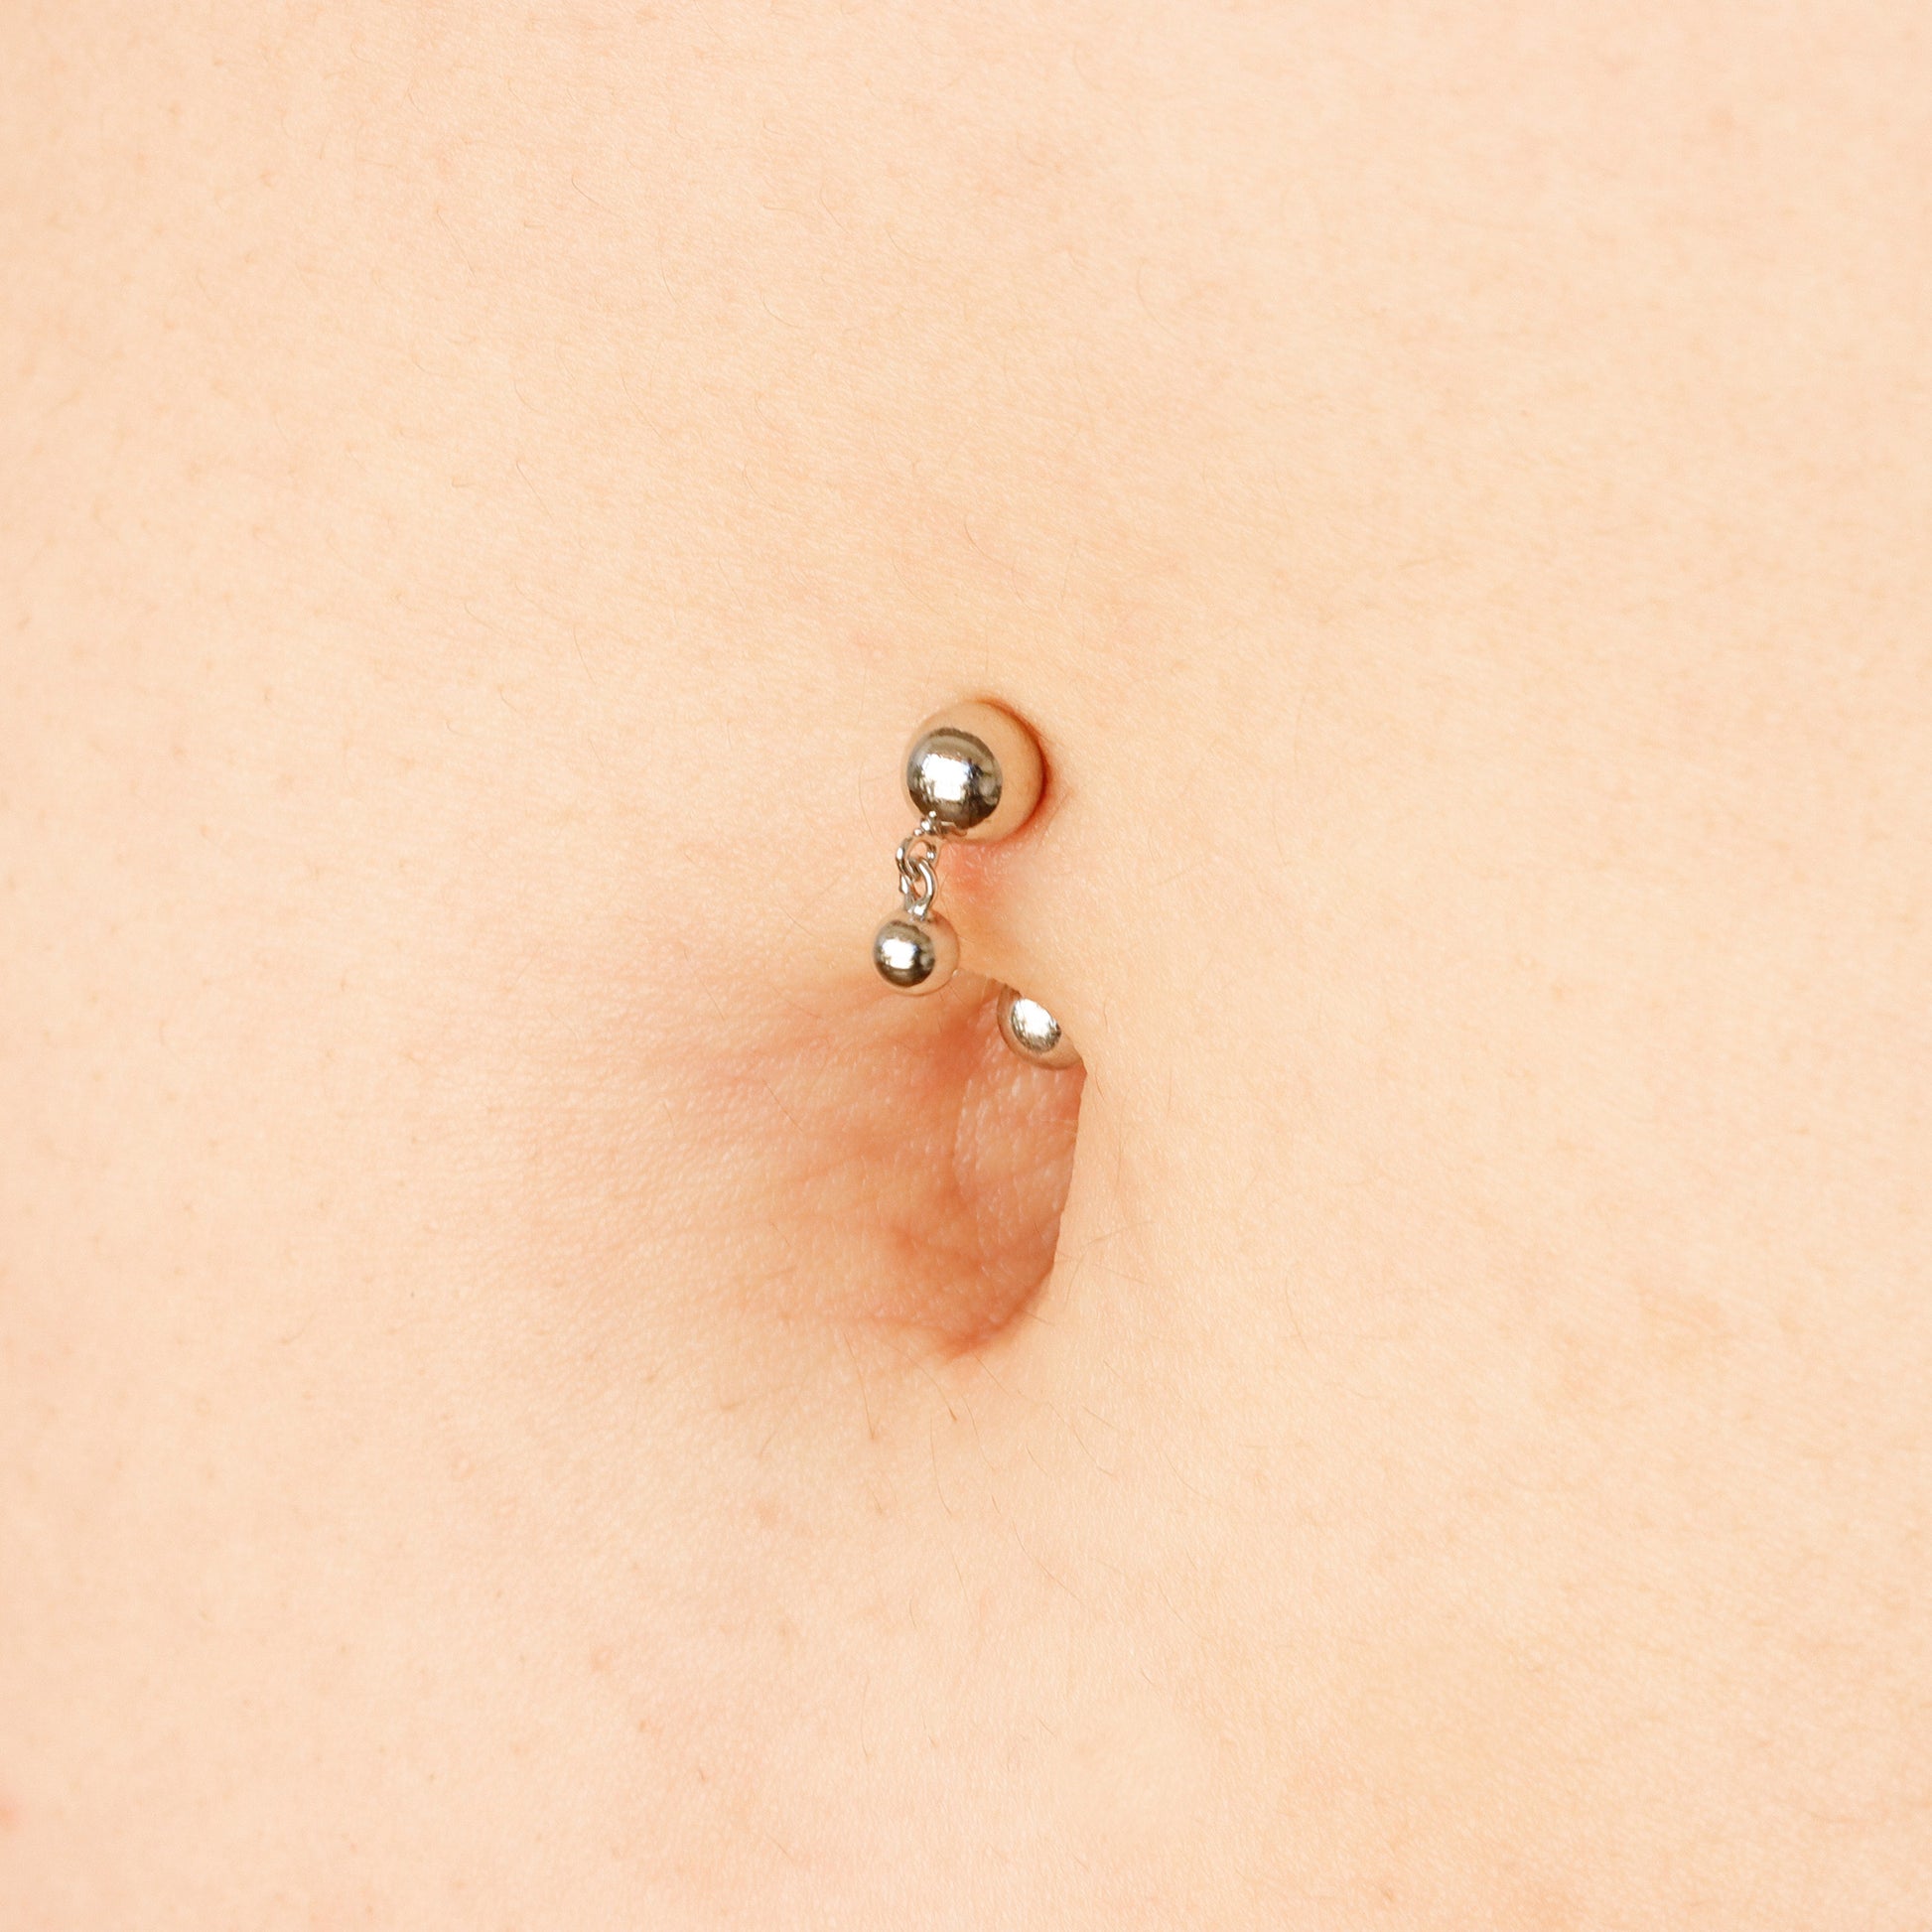 Solid 925 Silver | 16G 14G Petite Ball Dangle Reverse Belly Ring | 6mm 1/4" 8mm 5/16" 10mm 3/8" - Sturdy South